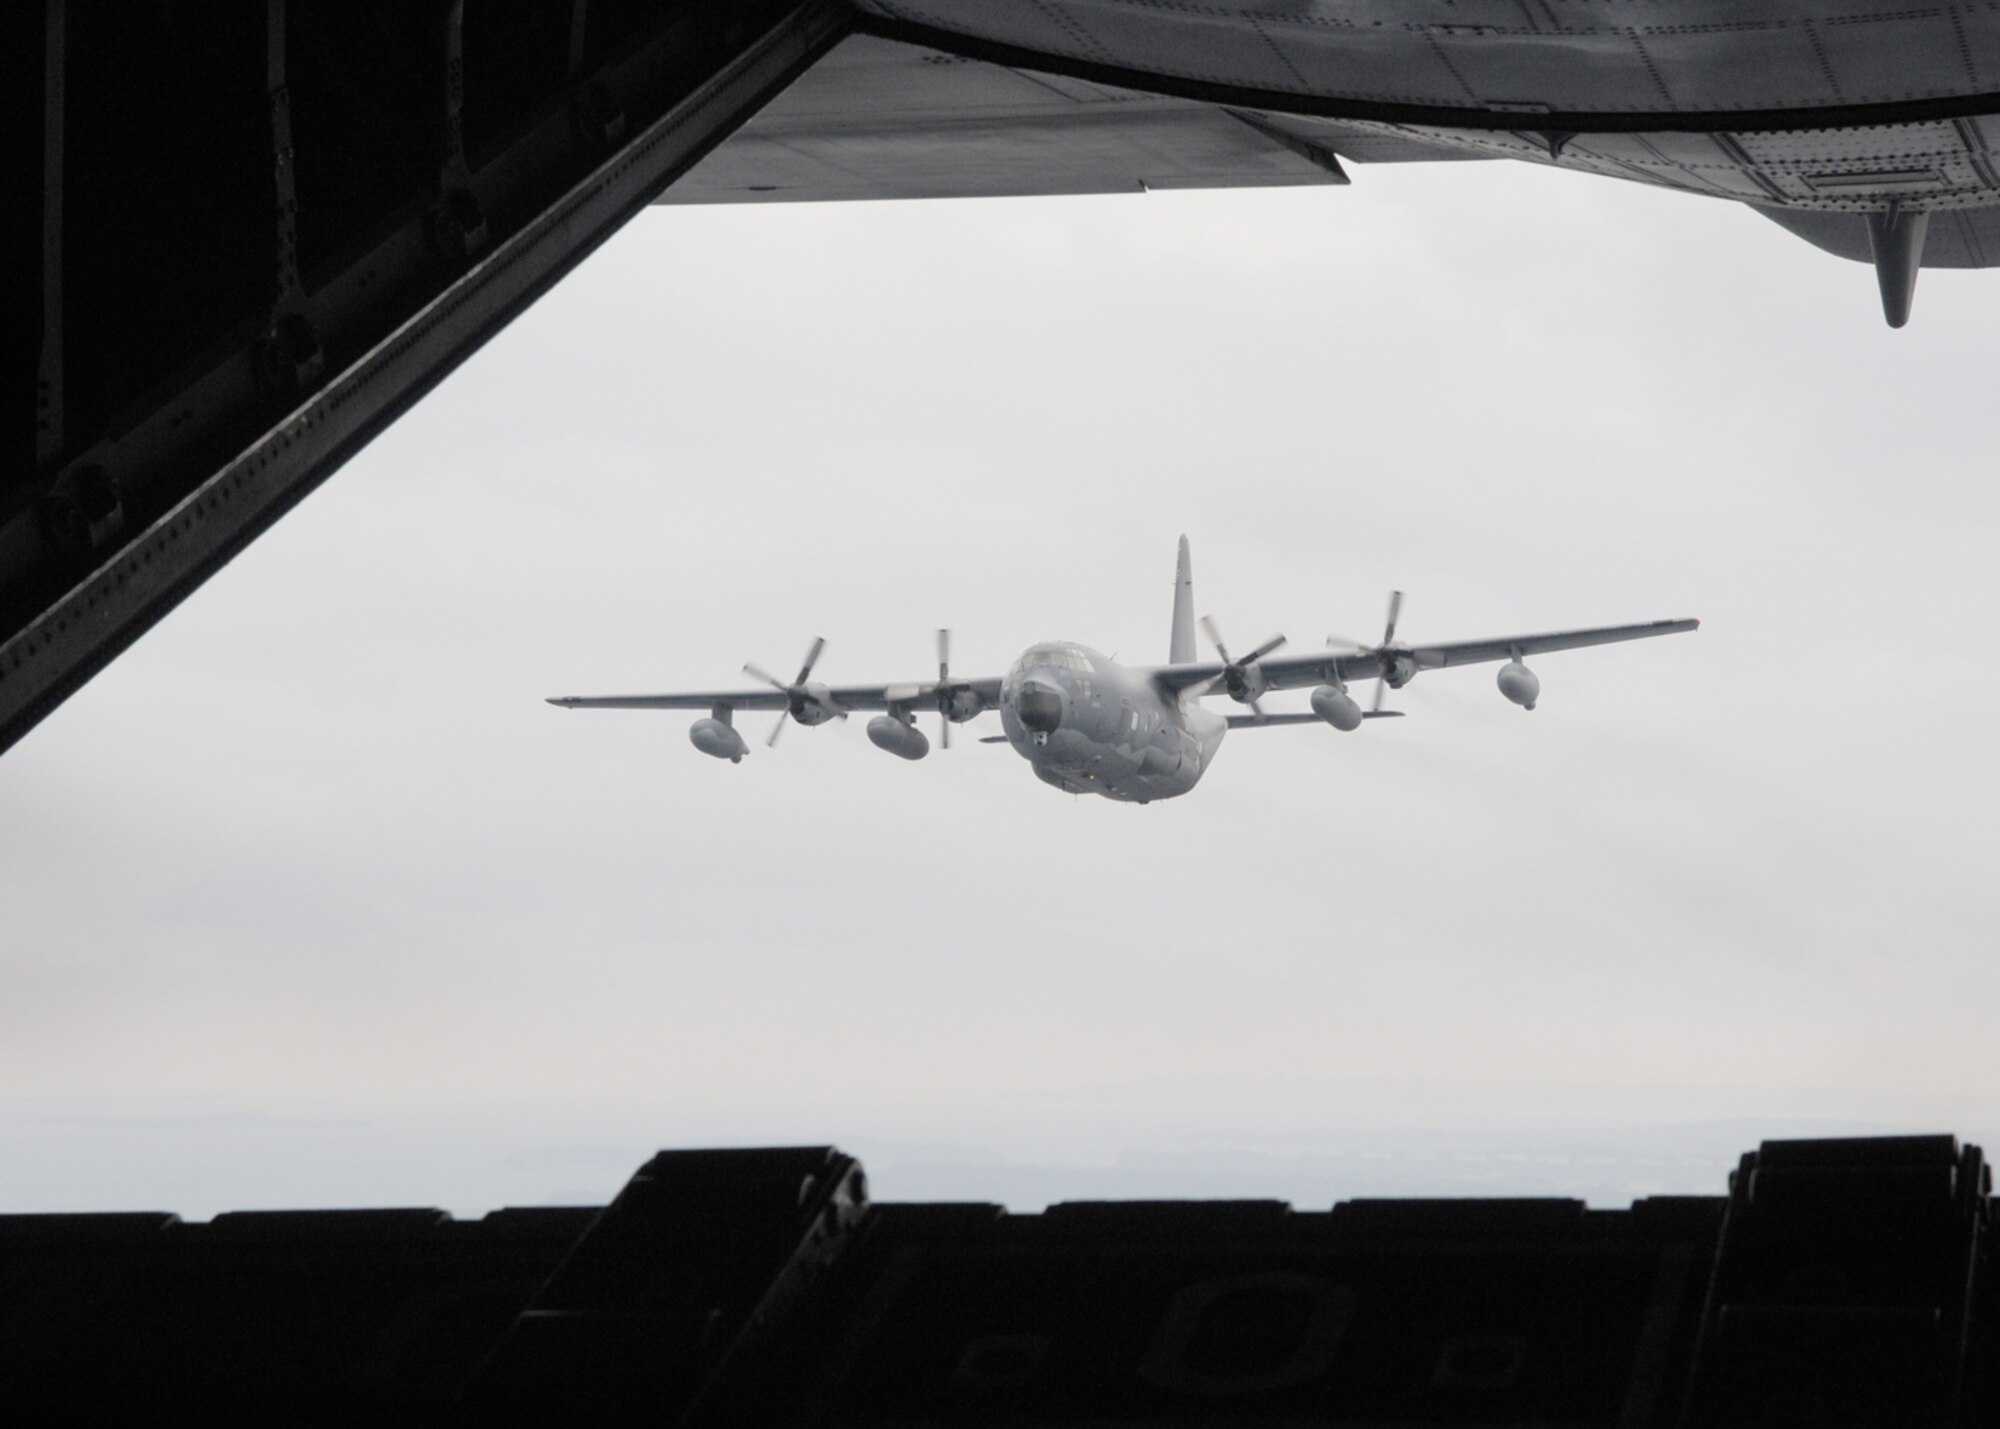 KADENA AIR BASE, Japan -- Col. David Mullins, the 353rd Special Operations Group commander, and Capt. Zak Blom, a 17th Special Operations Squadron pilot, line up a MC-130P Combat Shadow behind another MC-130P during a formation, low-level training mission here March 2. The primary mission of the 17th SOS is to aerial refuel special operations helicopters, but it is also capable of day and night low-level delivery of troops and equipment via airdrop or airland operations. (U.S. Air Force photo by Tech. Sgt. Aaron Cram)